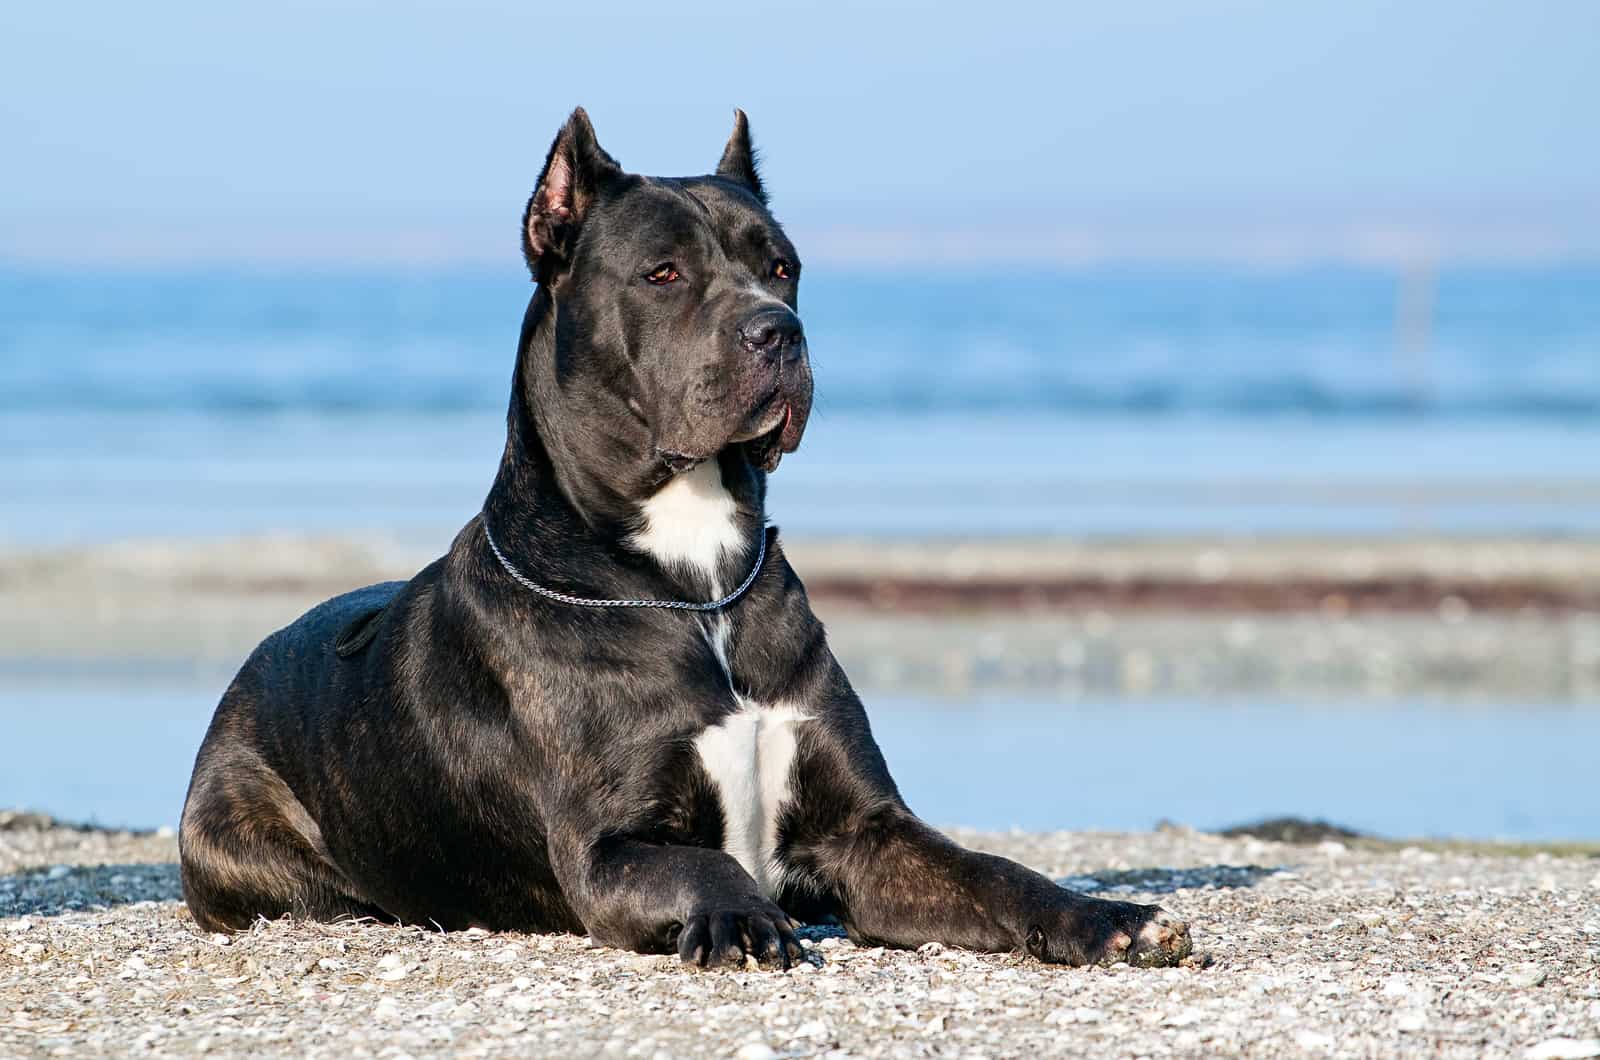 6 Best Harness For Cane Corso: Safety And Comfort First